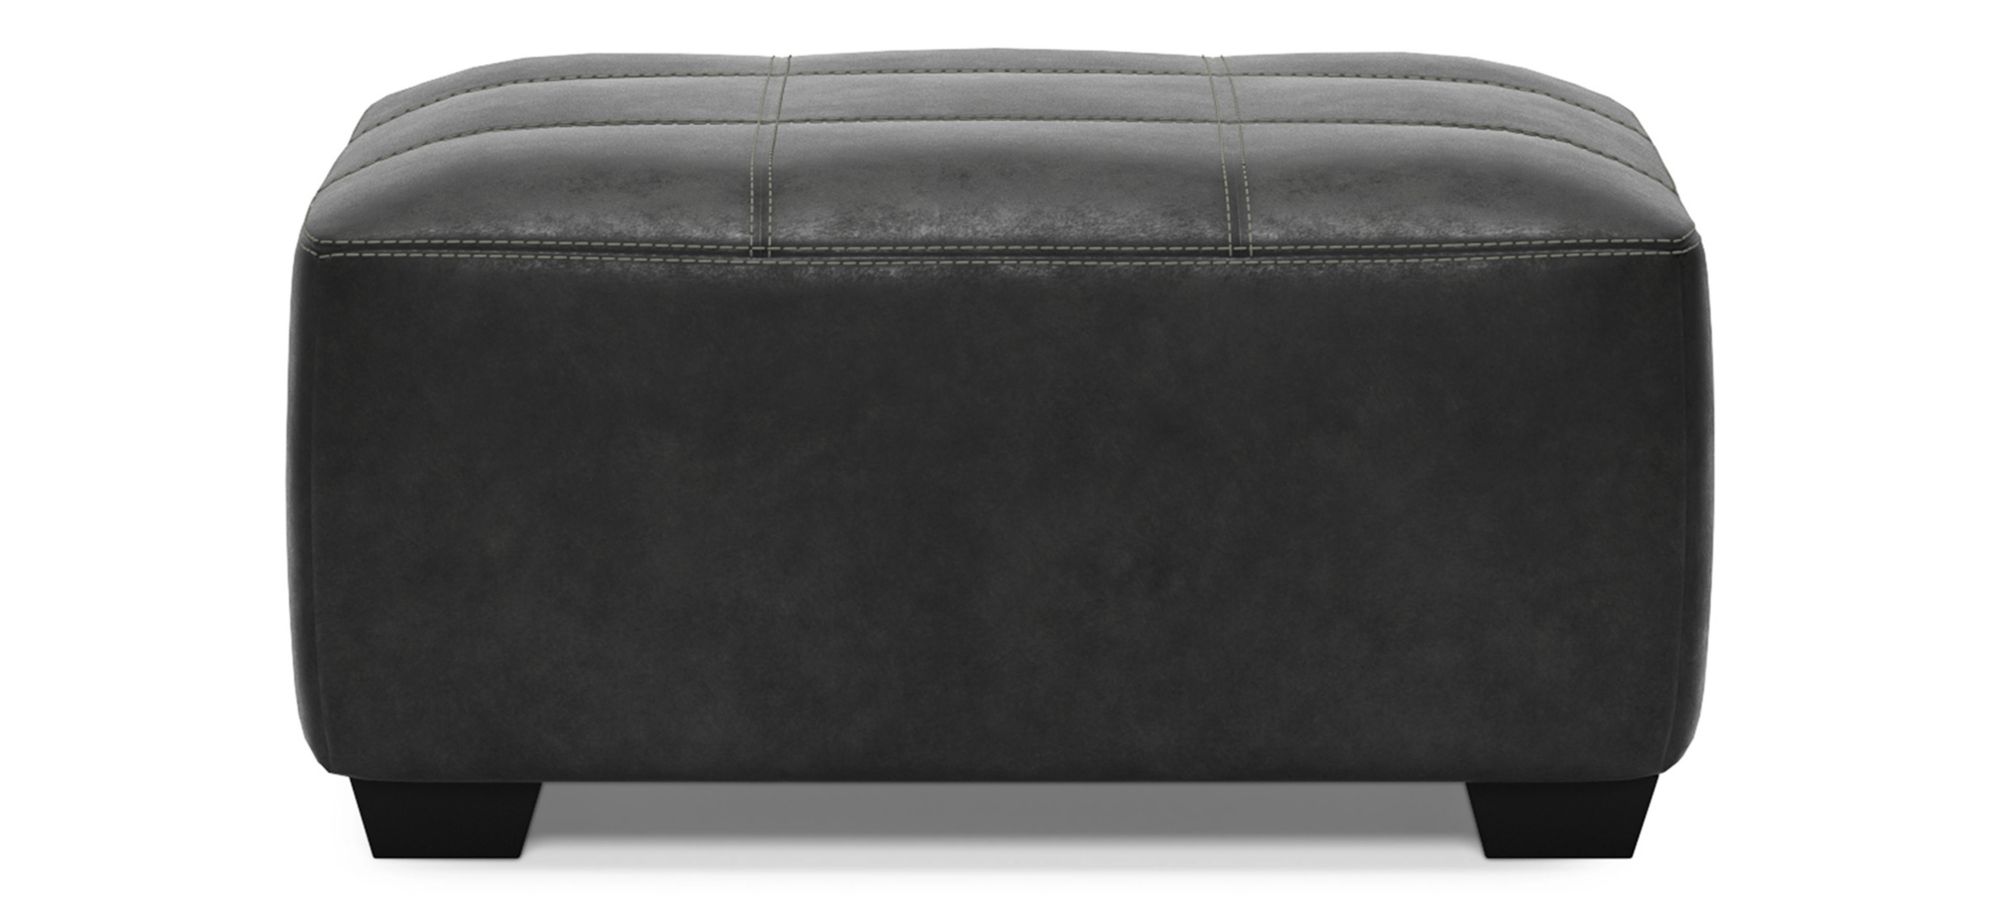 Bilgray Oversized Accent Ottoman in Pewter by Ashley Furniture